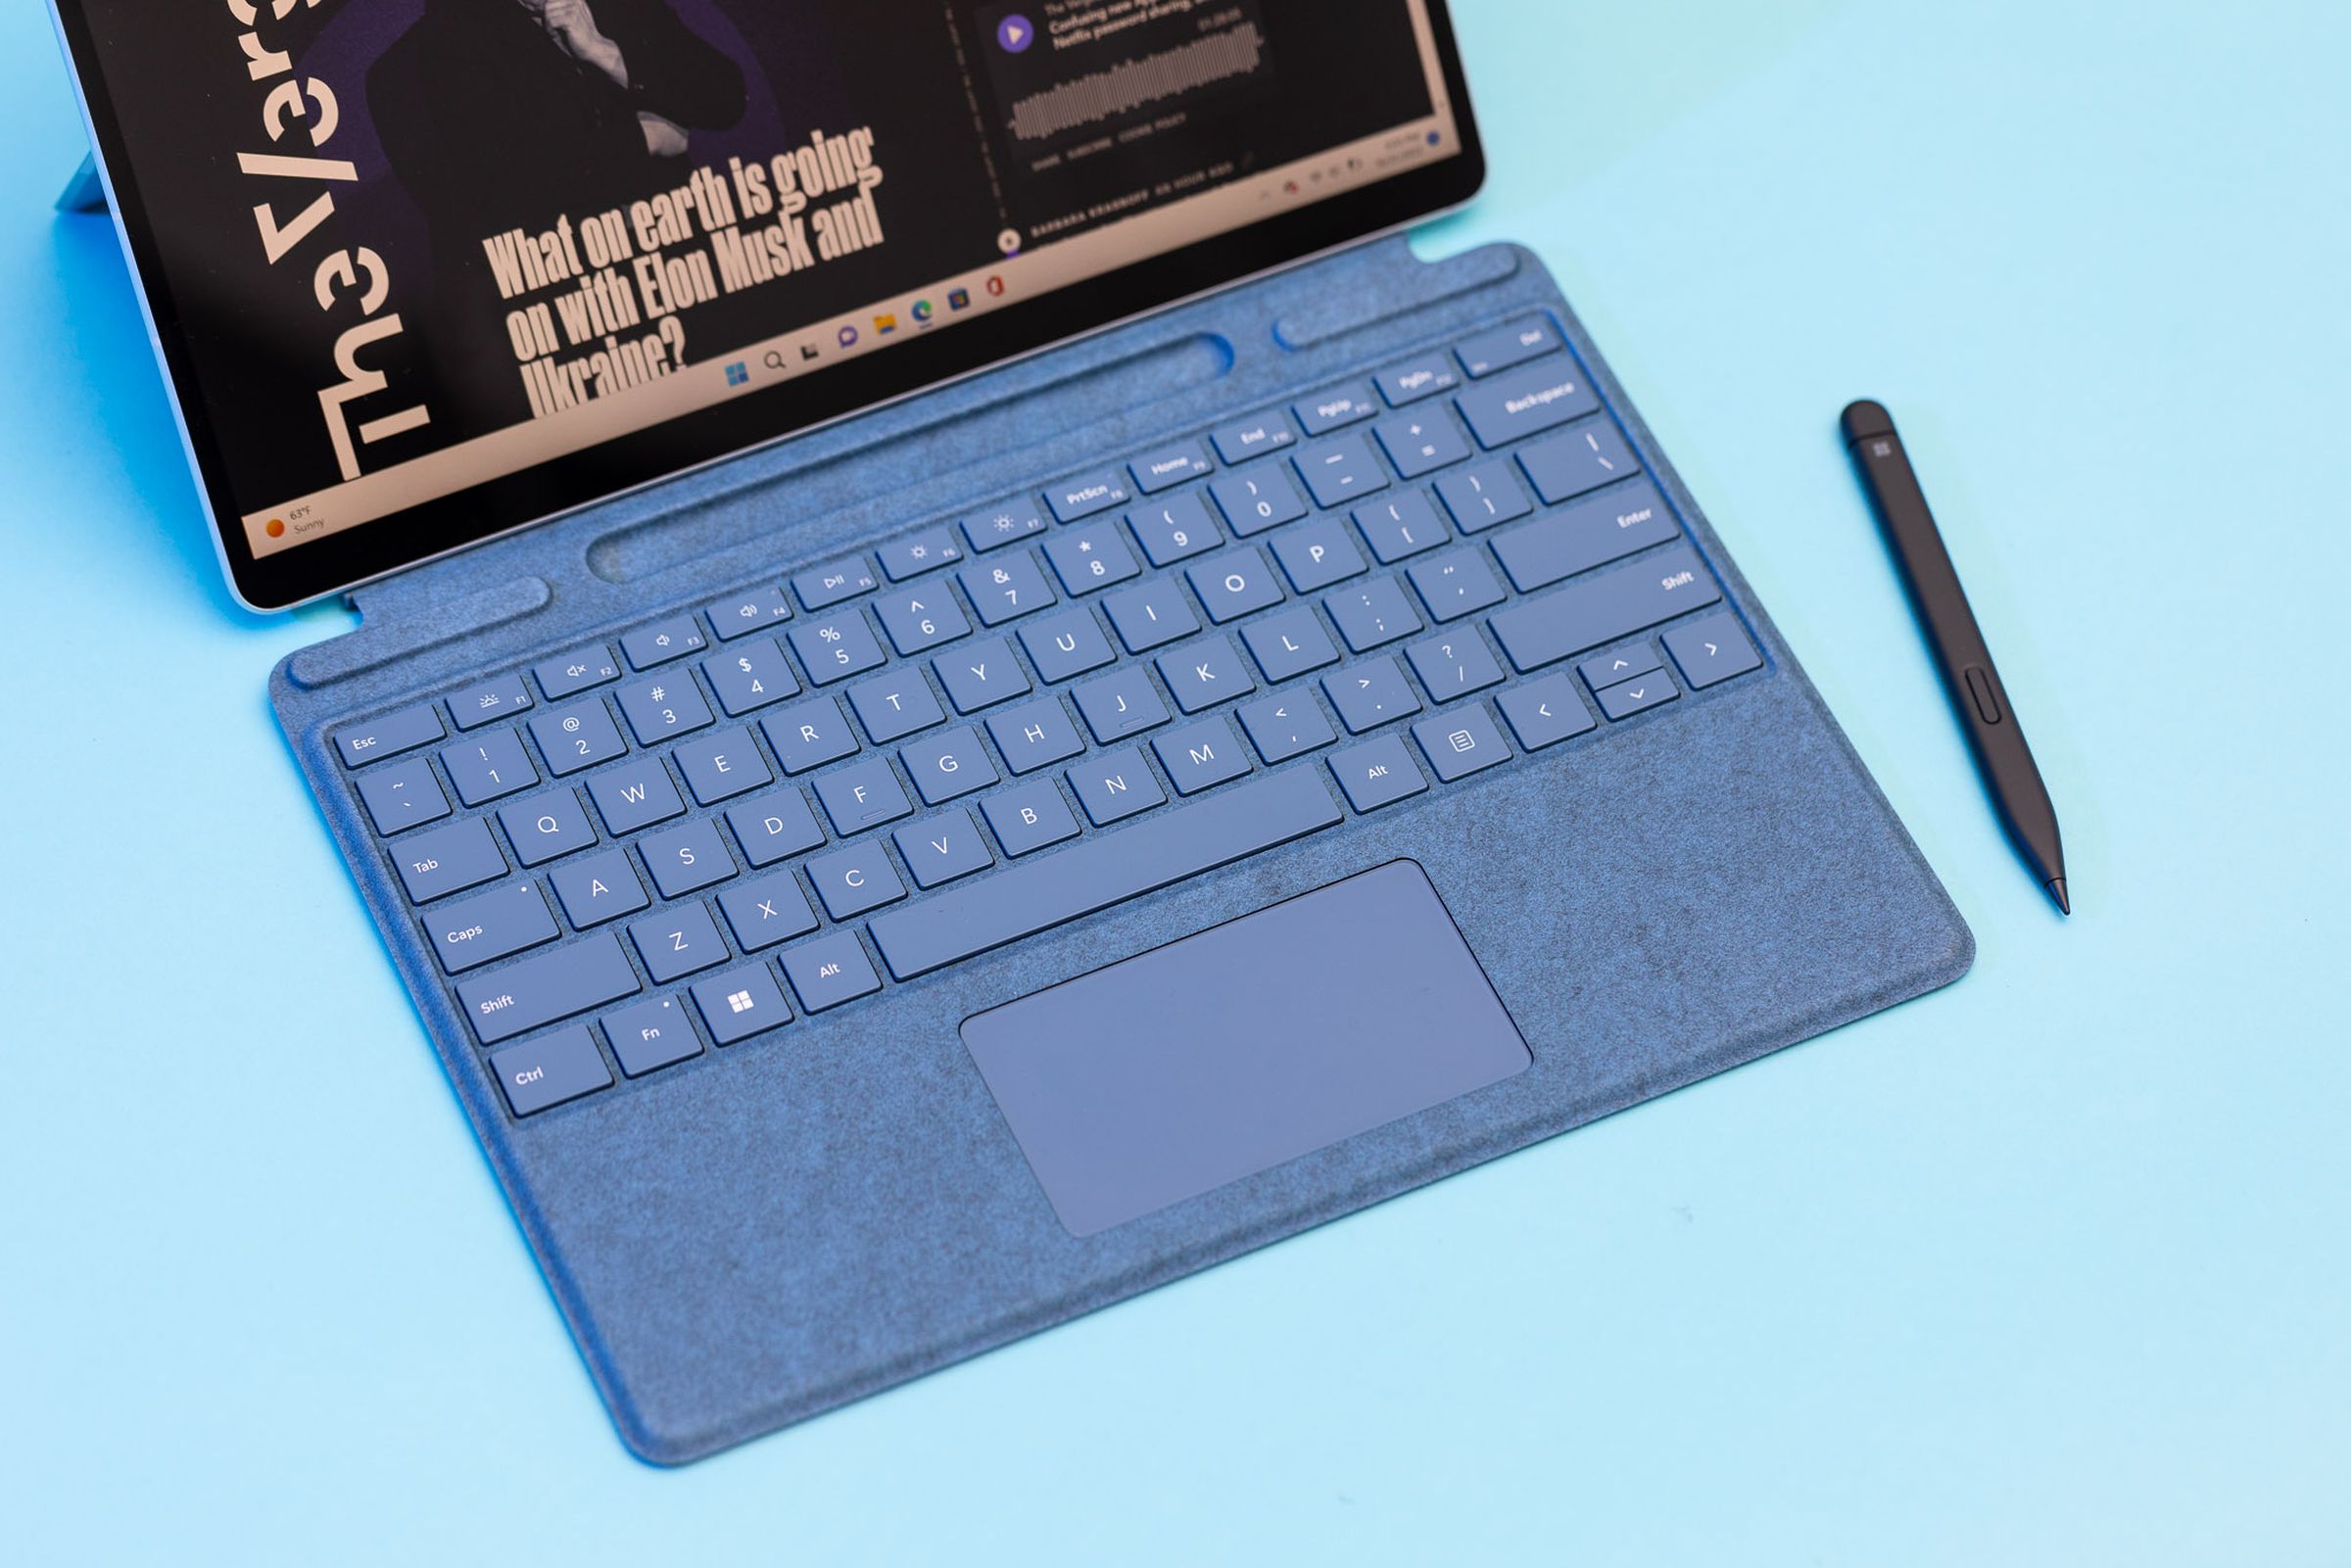 The Surface Pro 9 keyboard deck and stylus seen from above on a blue table cover.